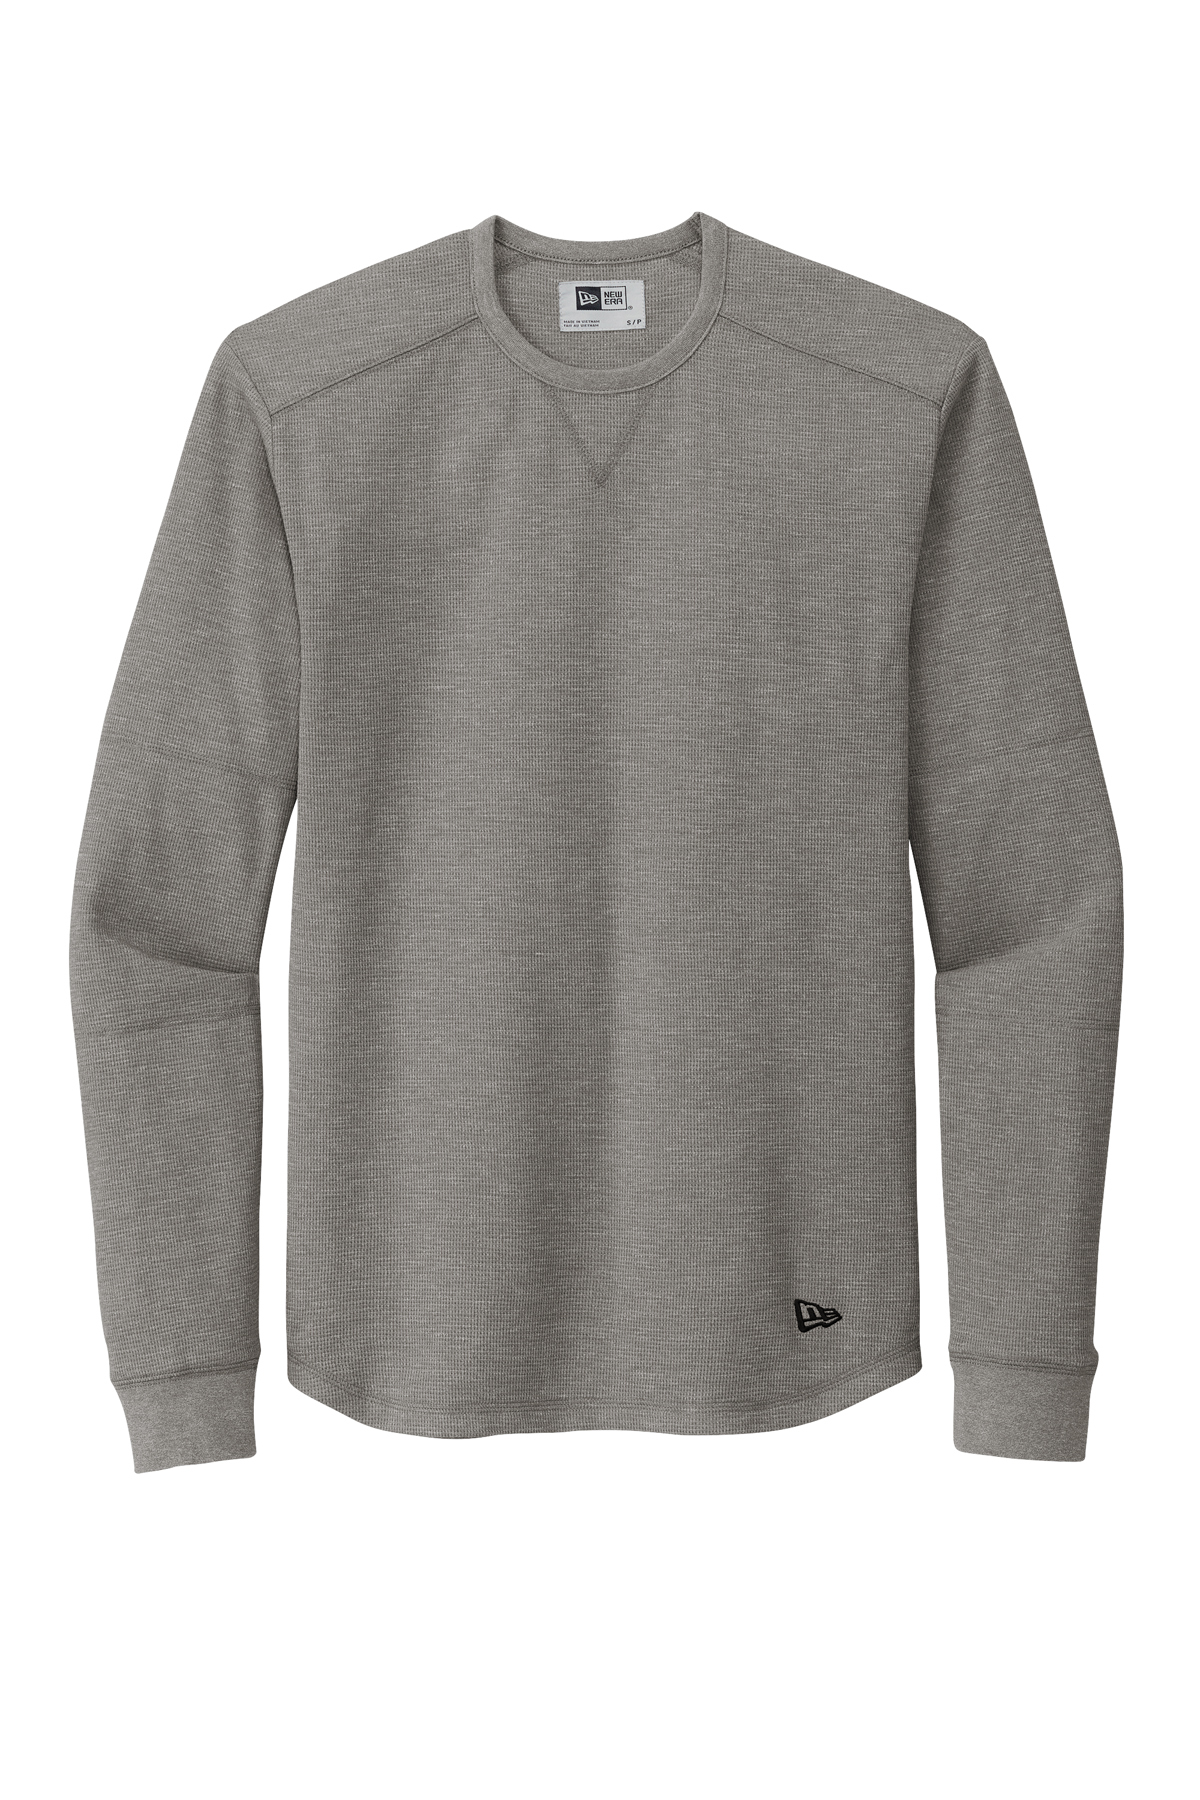 New Era Thermal Long Sleeve | Product | Company Casuals